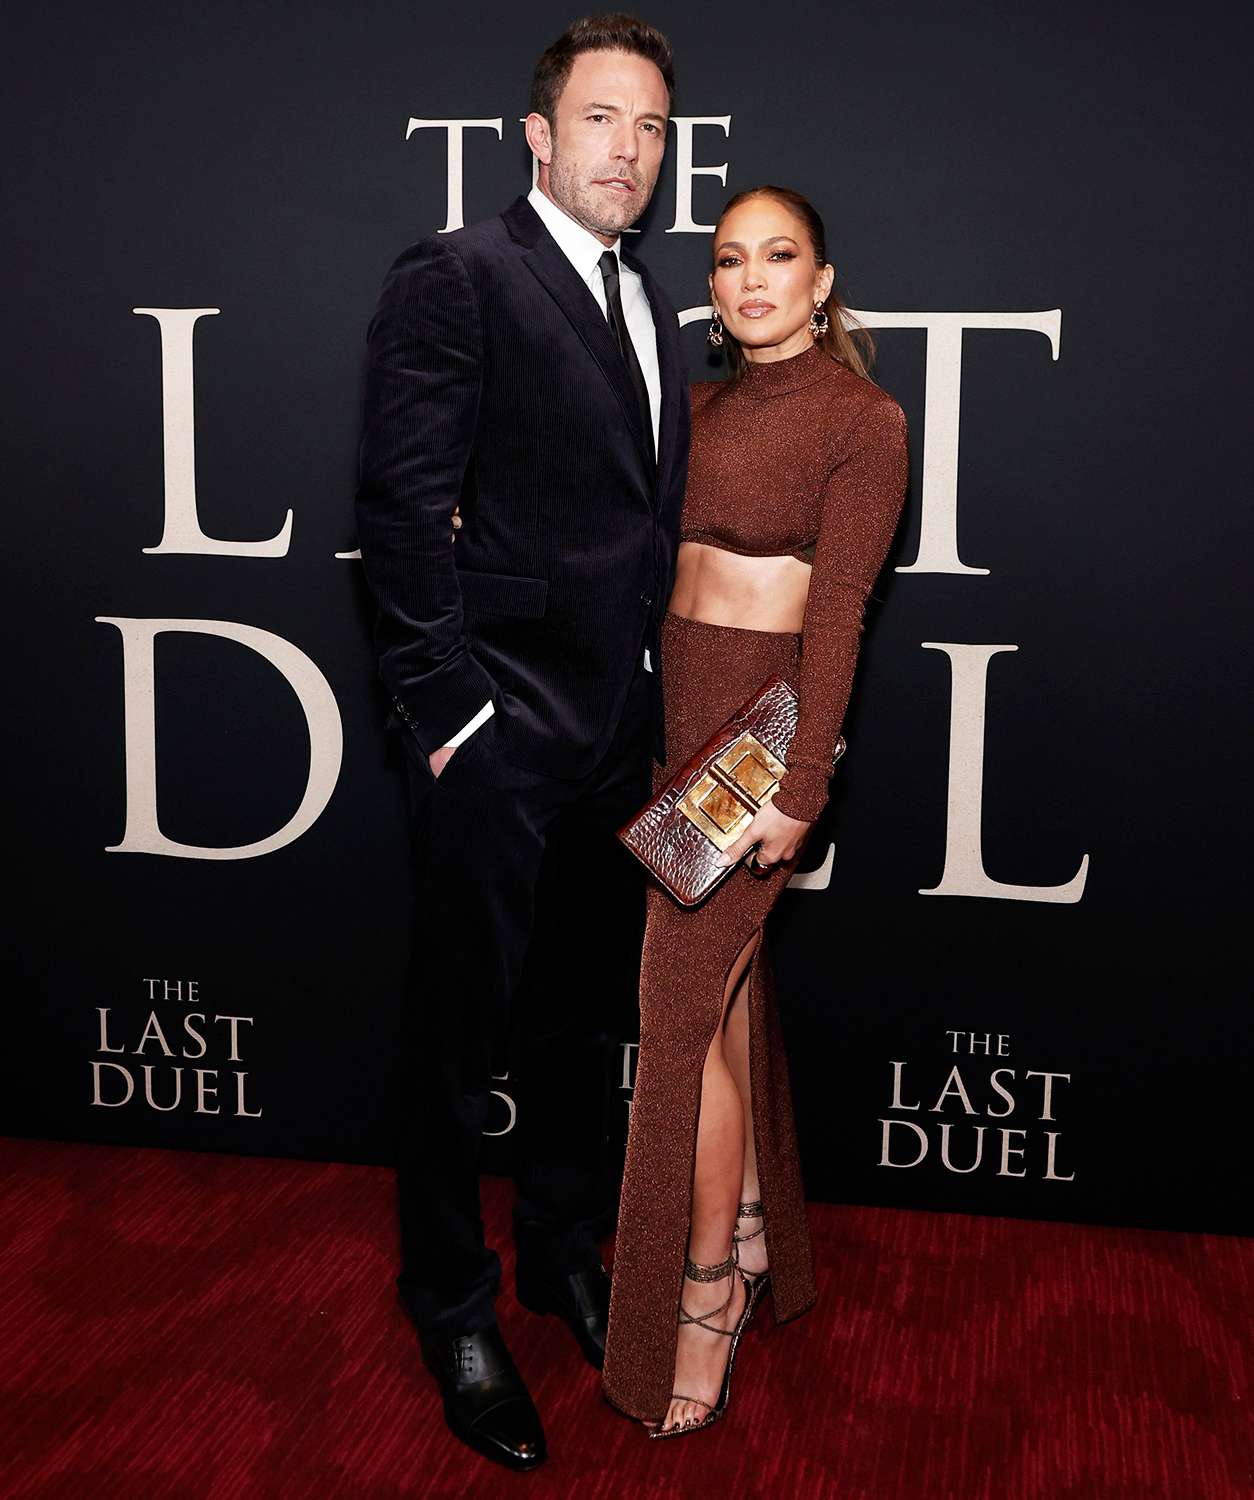 Ben Affleck Was Hesitant with Jennifer Lopez Romance Because of 'Responsibility' to His Kids